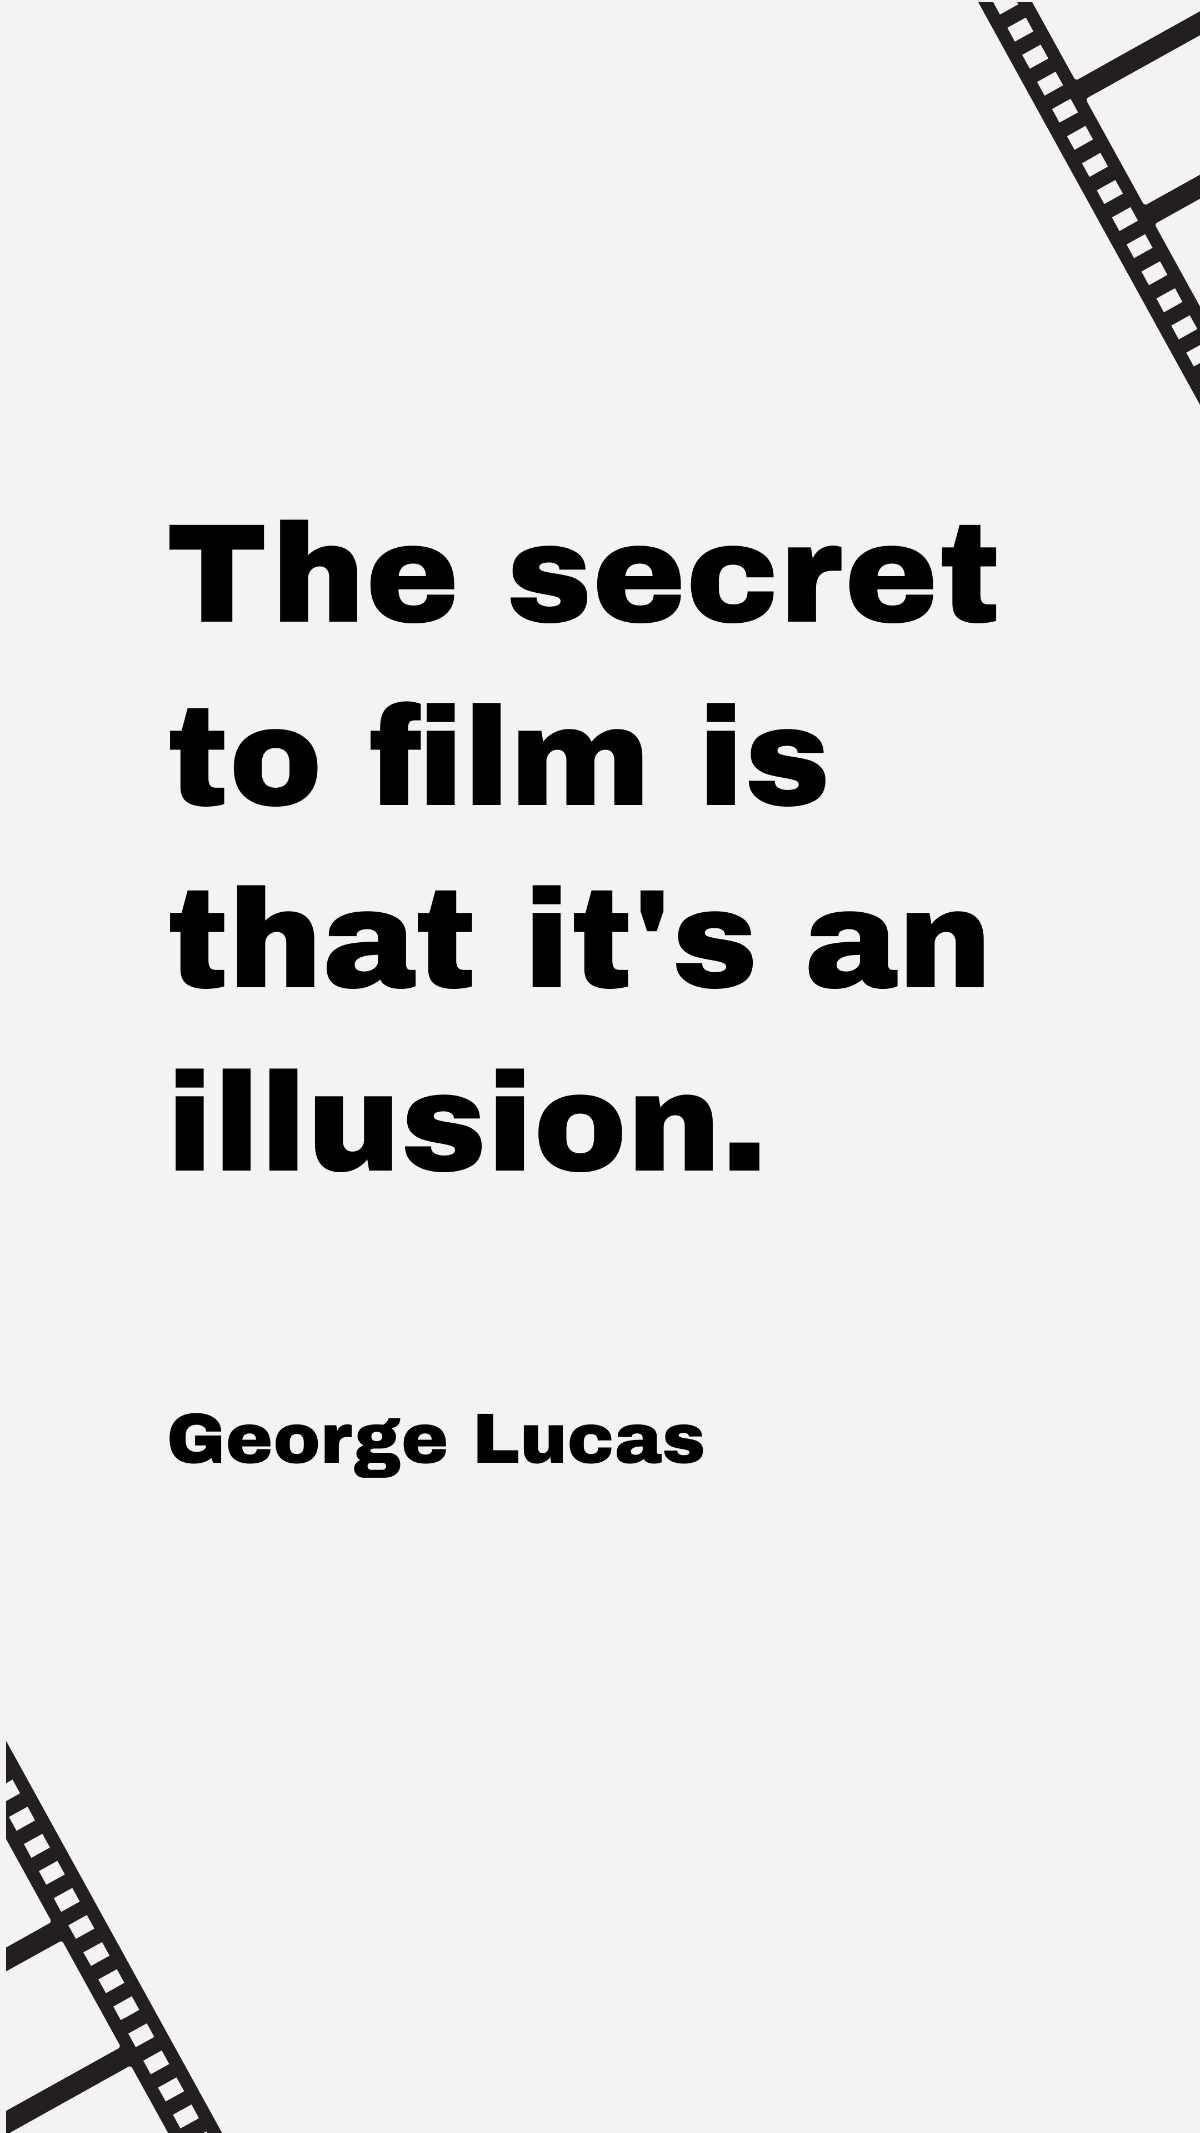 George Lucas - The secret to film is that it's an illusion.